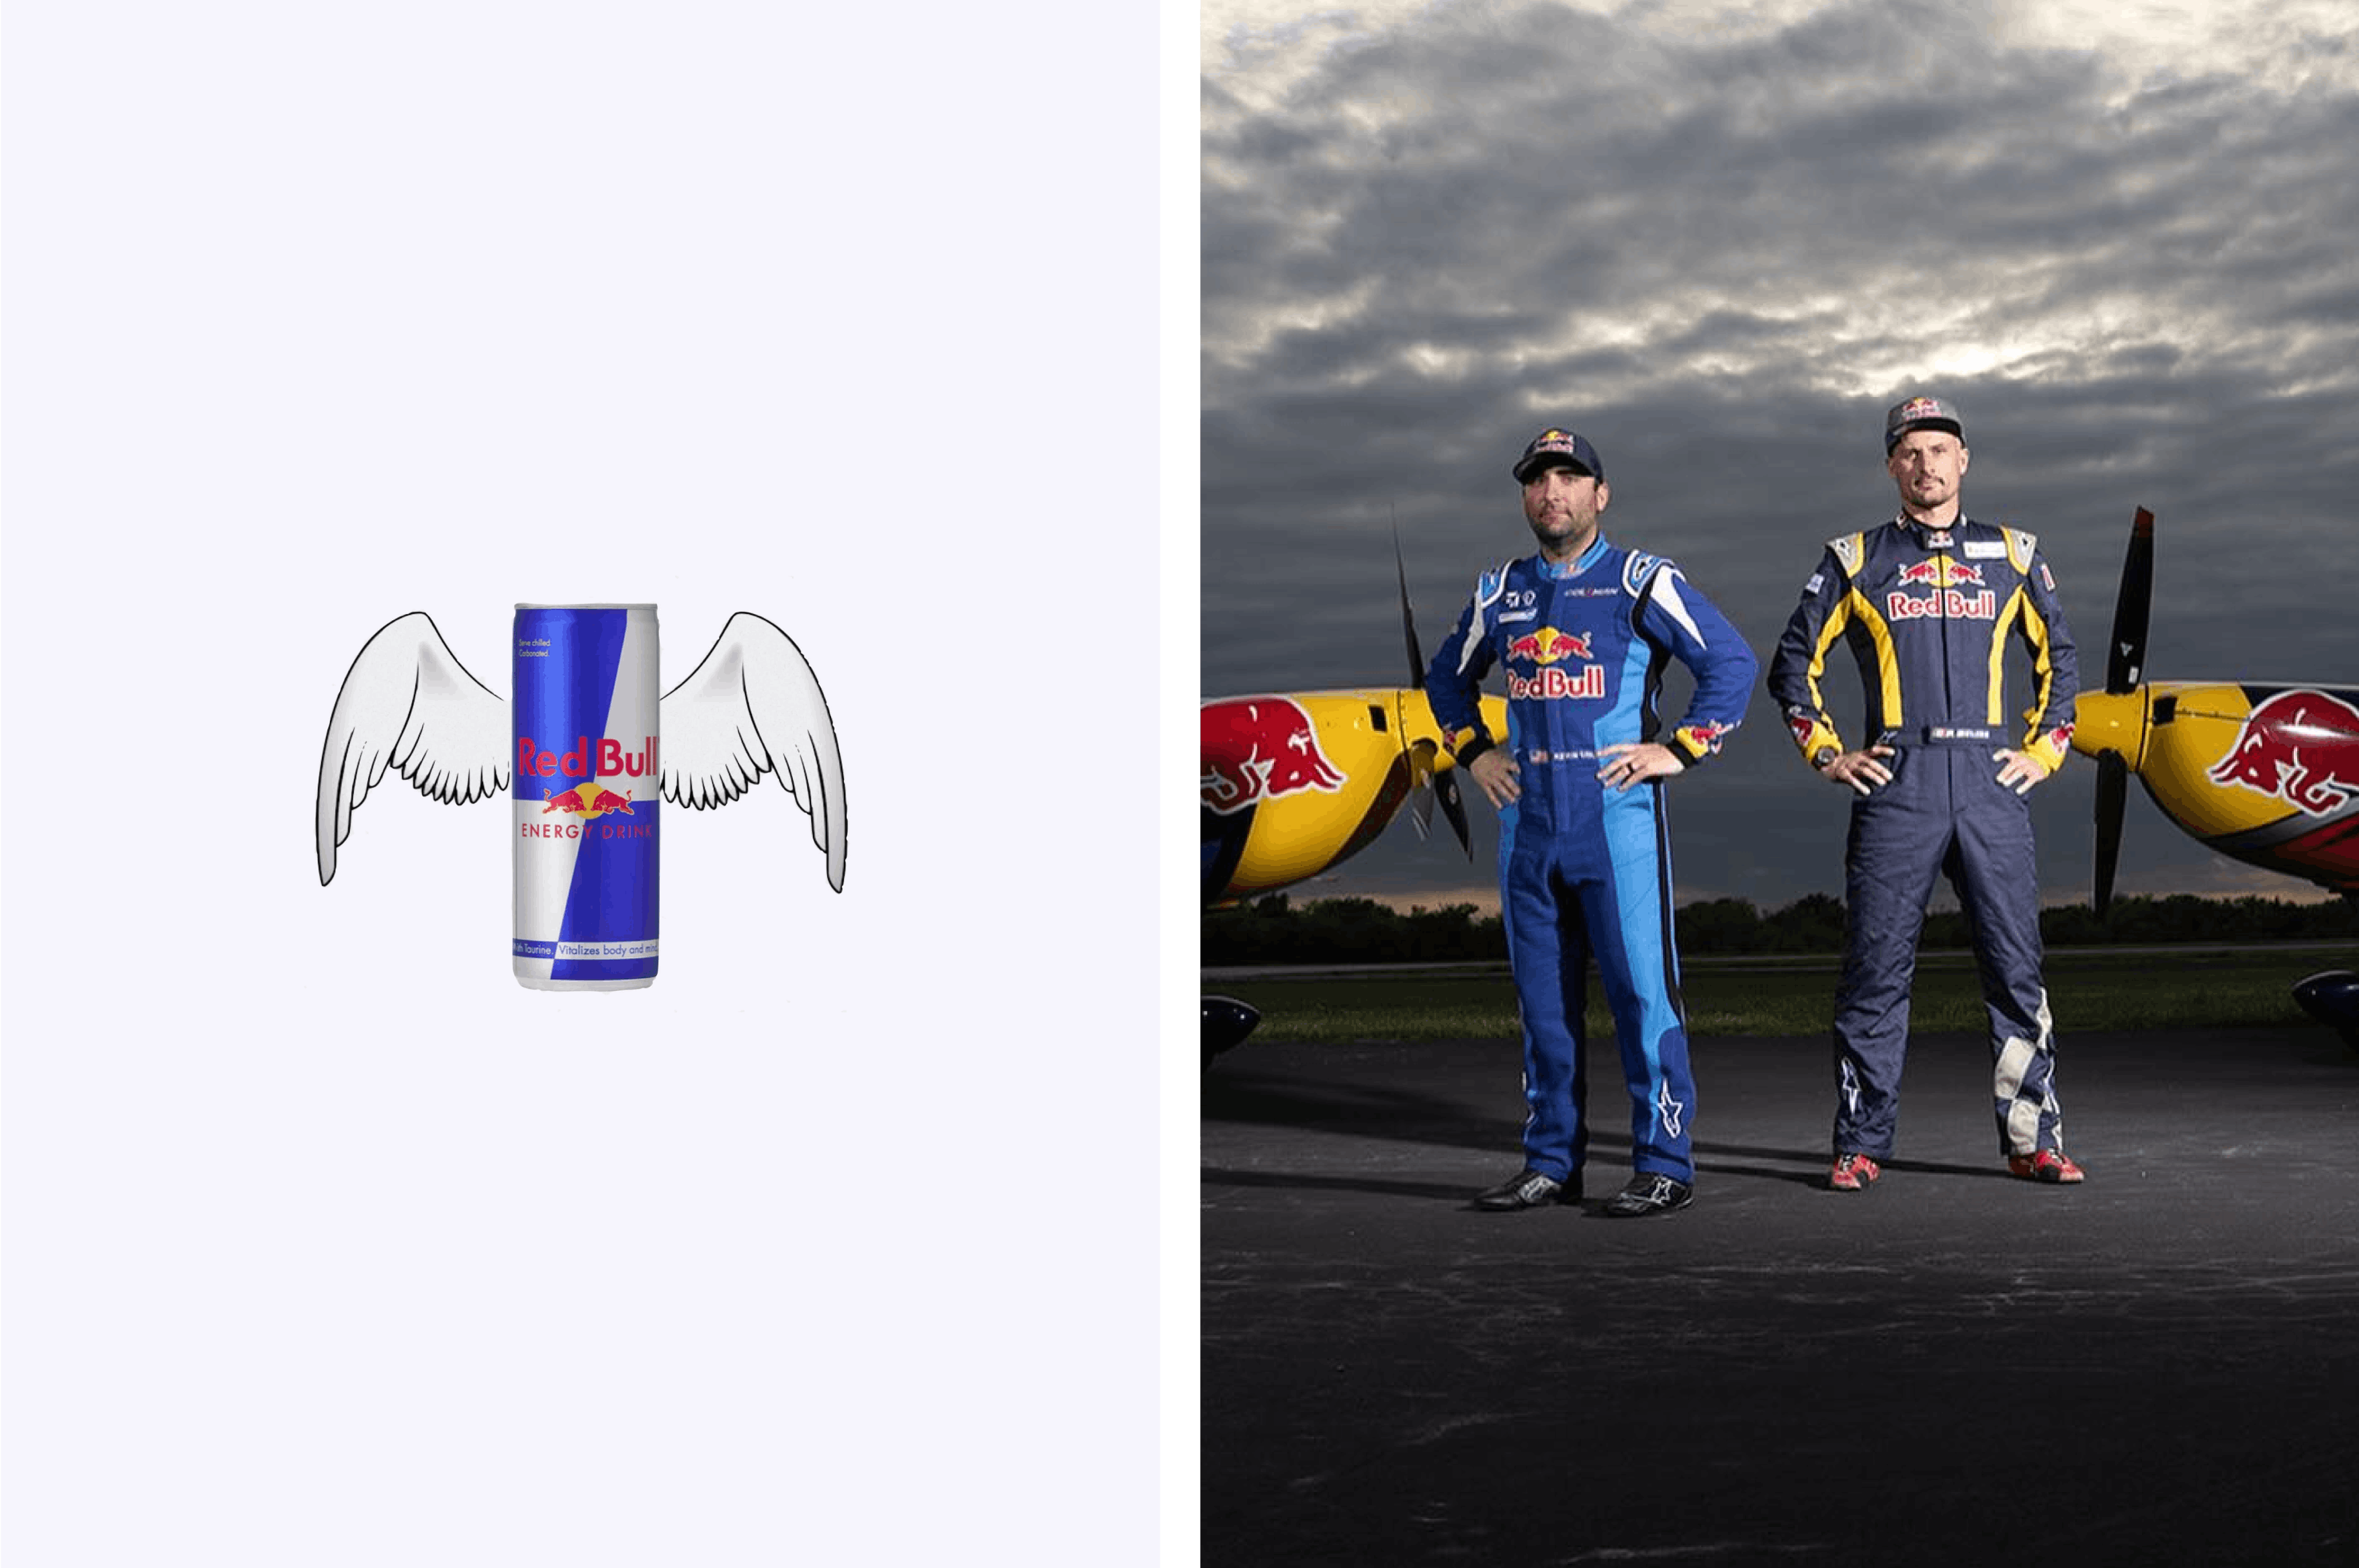 redbull can and two pilots sponsored by redbull